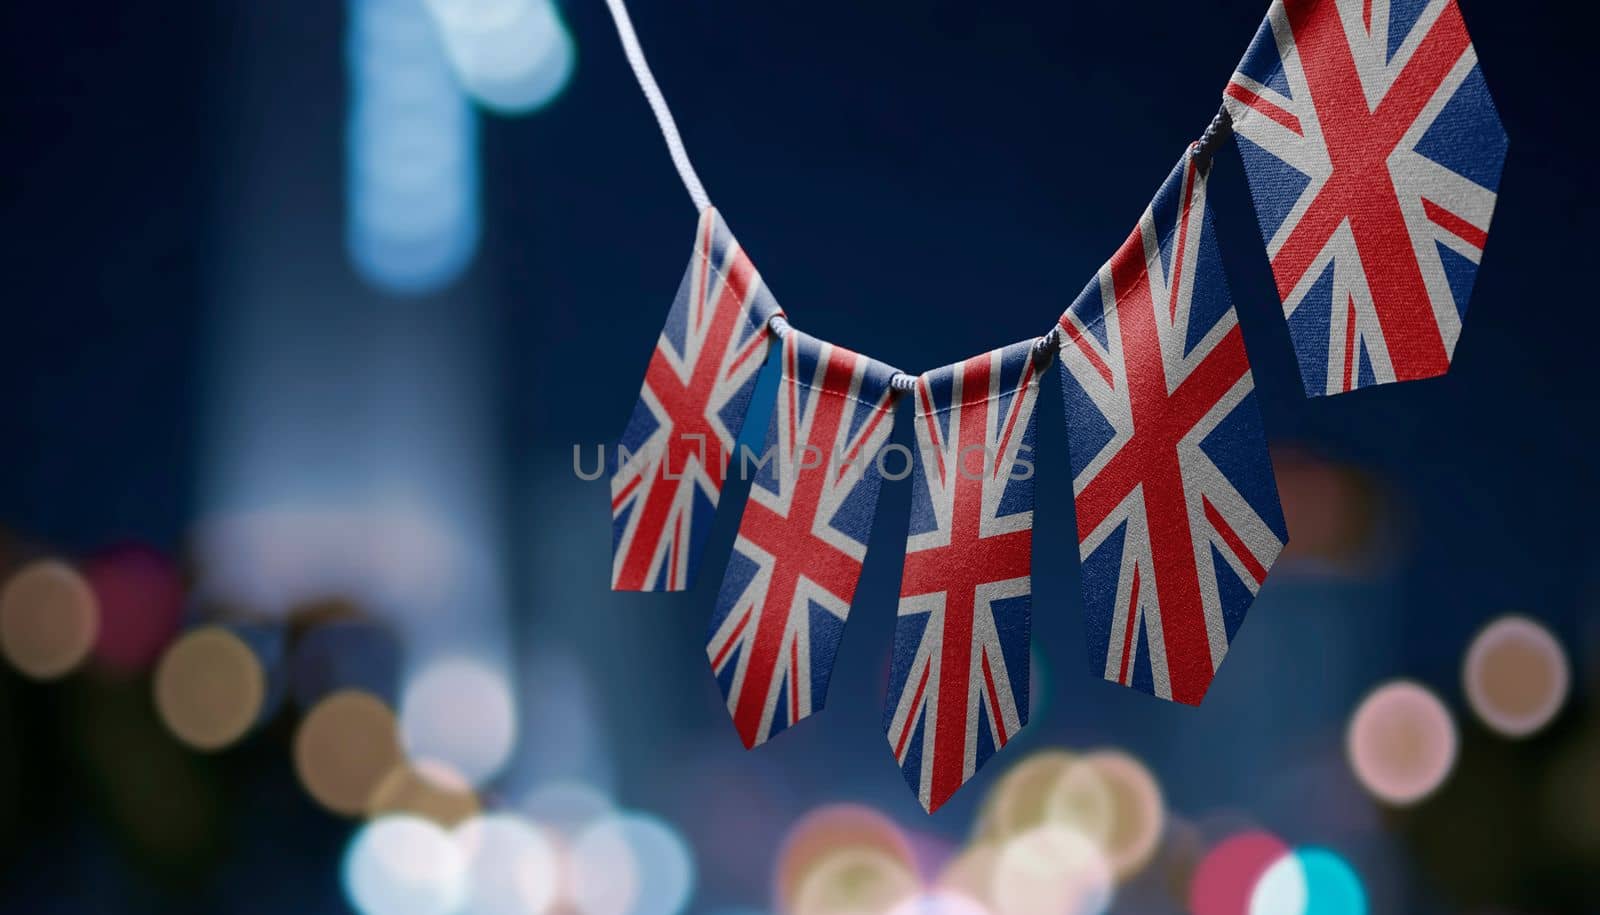 A garland of United Kingdom national flags on an abstract blurred background.